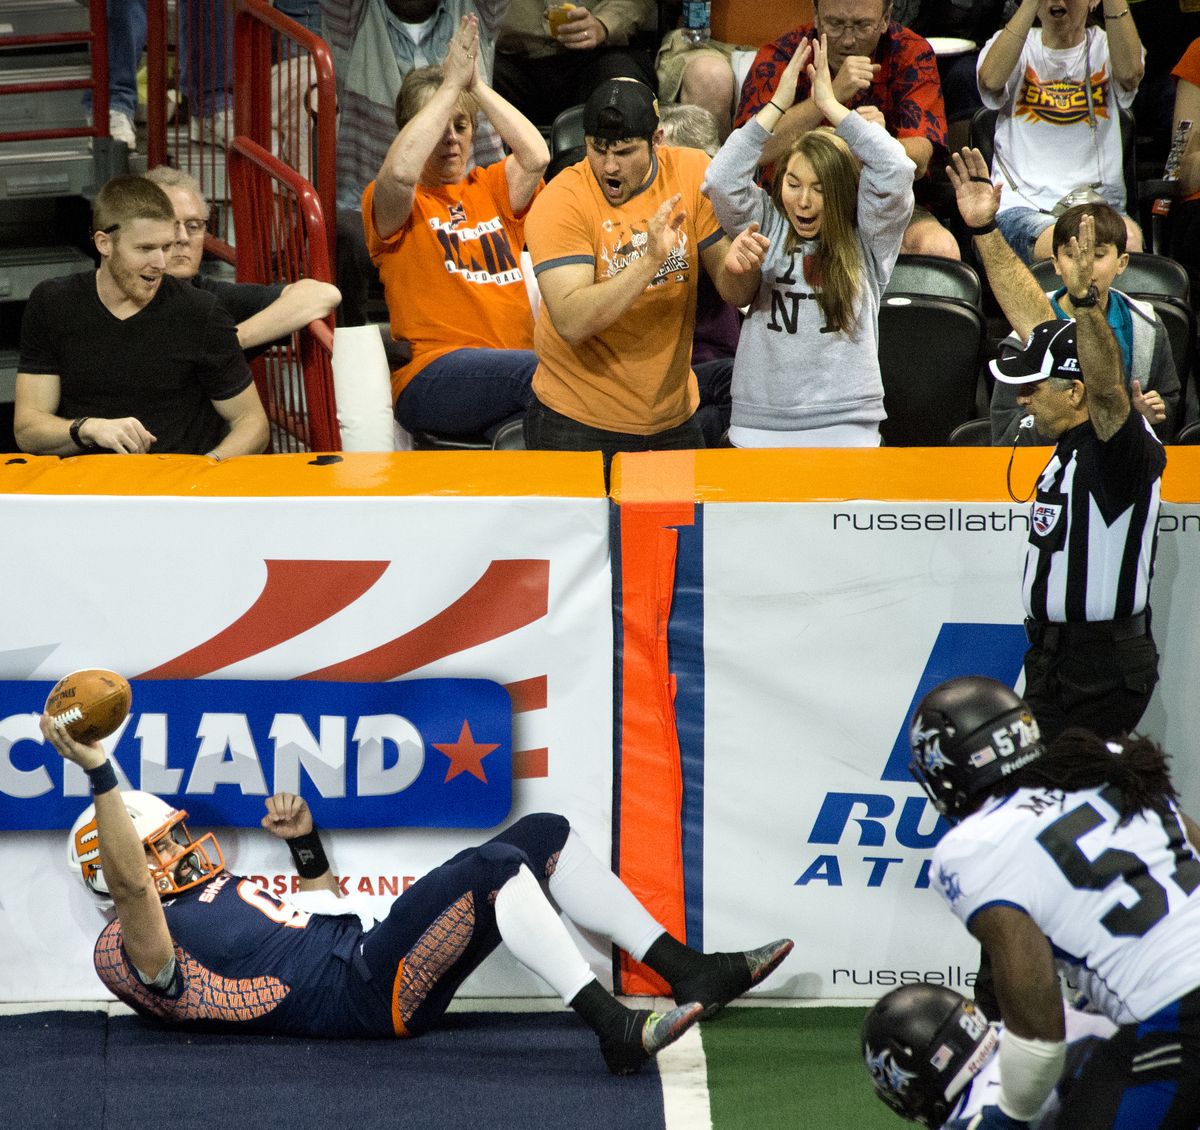 Spokane Shock fans react after quarterback Erik Meyer rushes for a first-quarter touchdown Friday night at the Arena. (Dan Pelle)